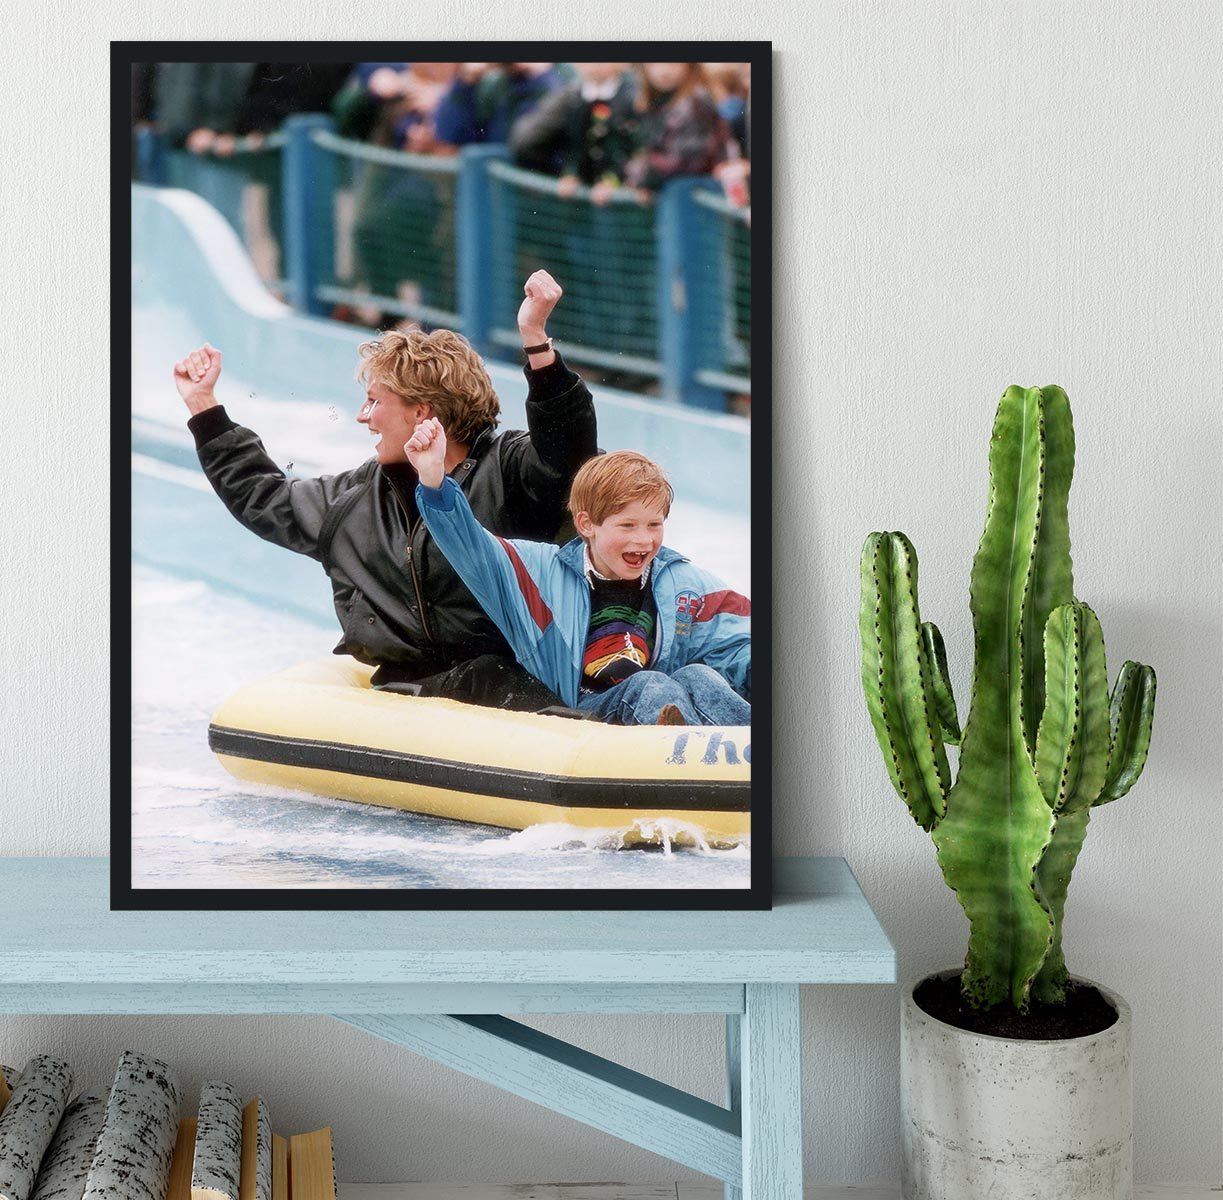 Princess Diana with Prince Harry on a water ride Framed Print - Canvas Art Rocks - 2